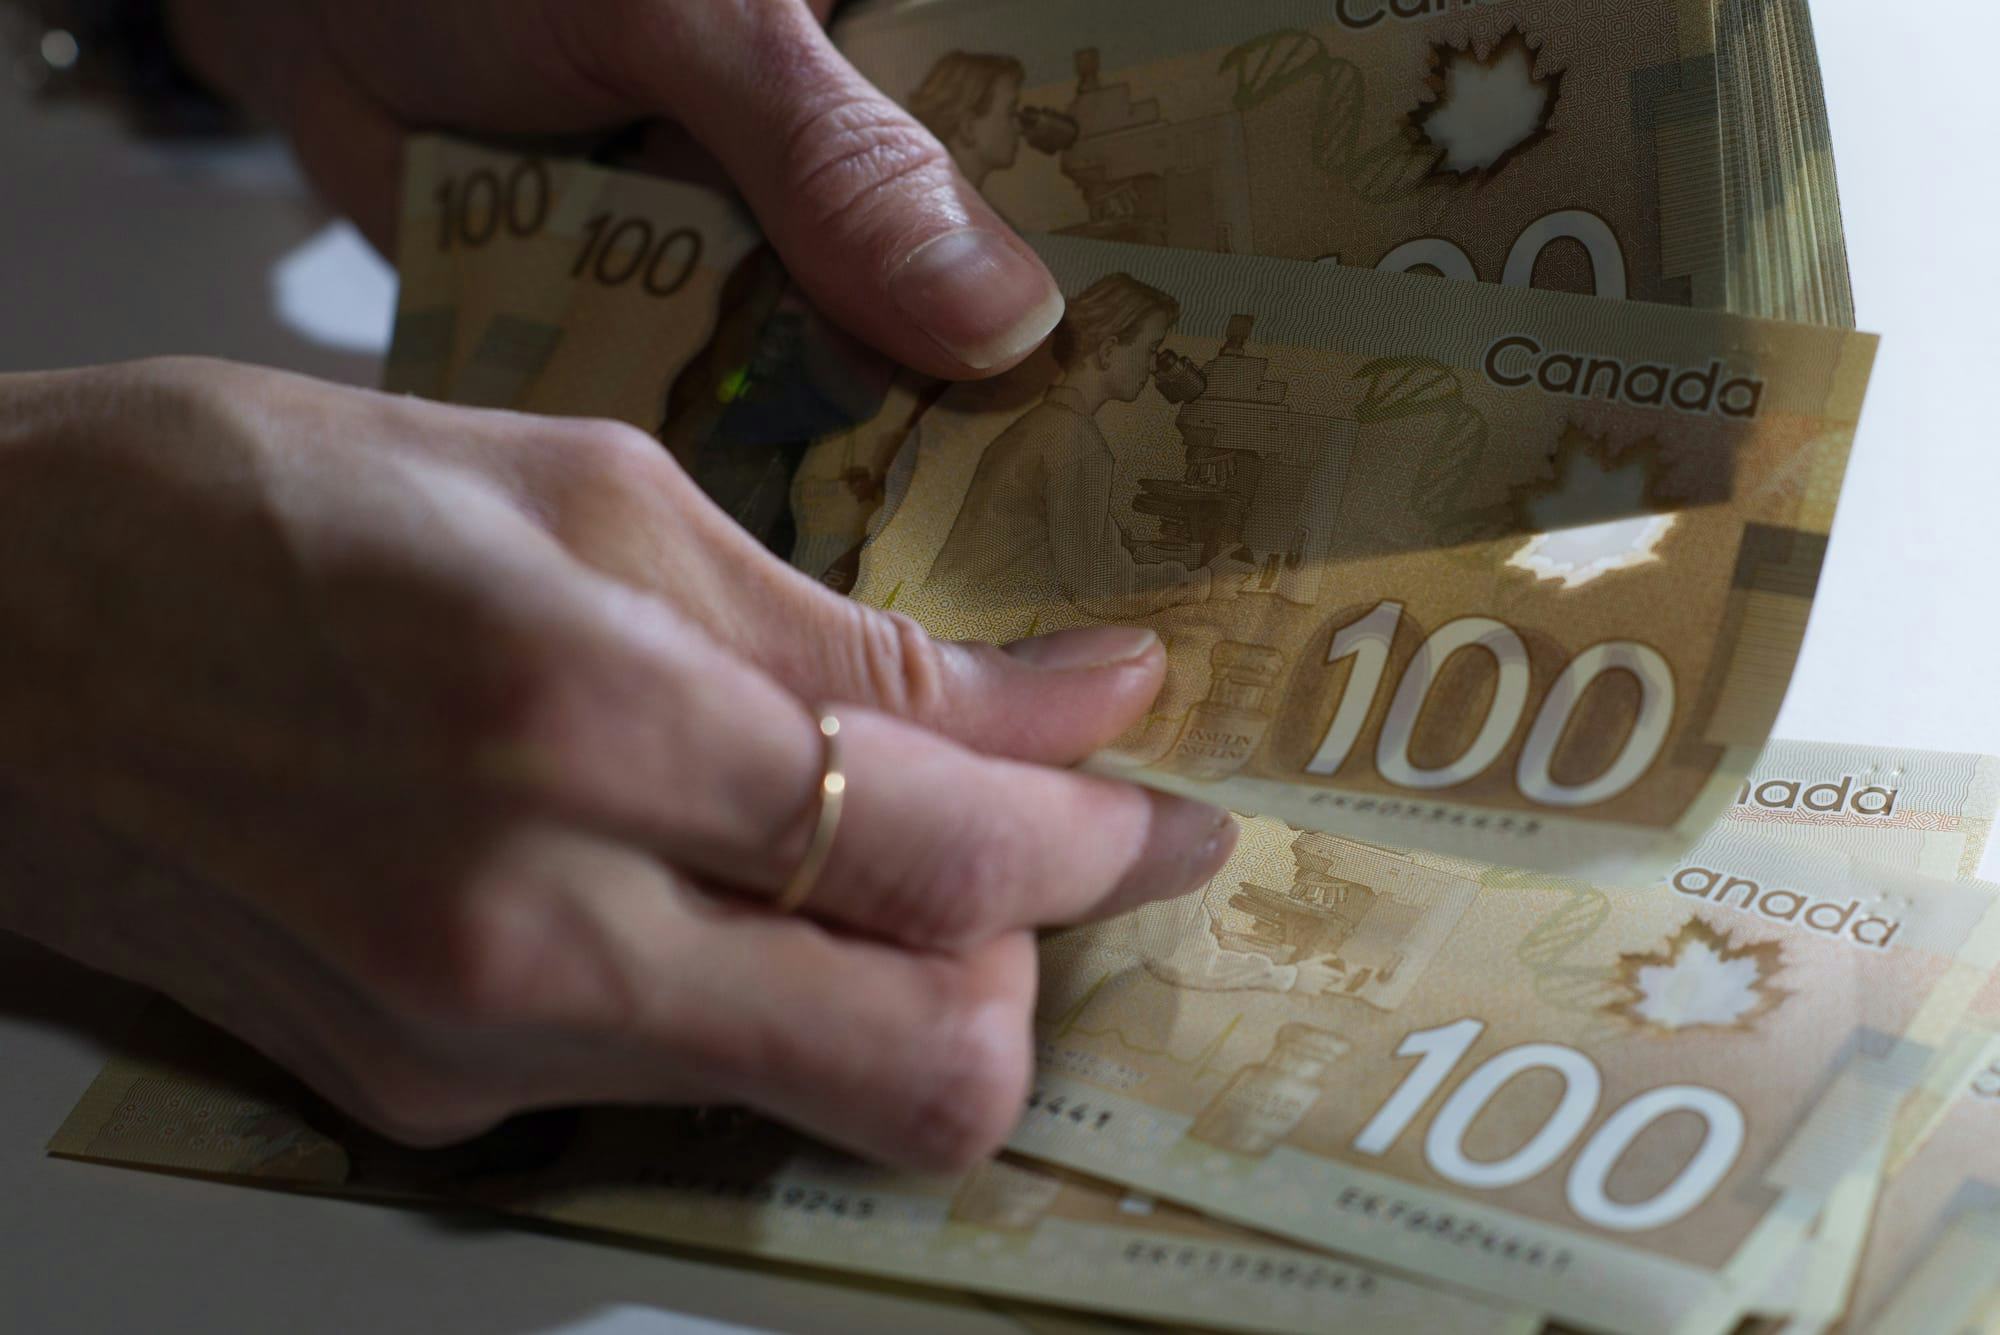 Two hands are shown in closeup, counting $100 Canadian bills.